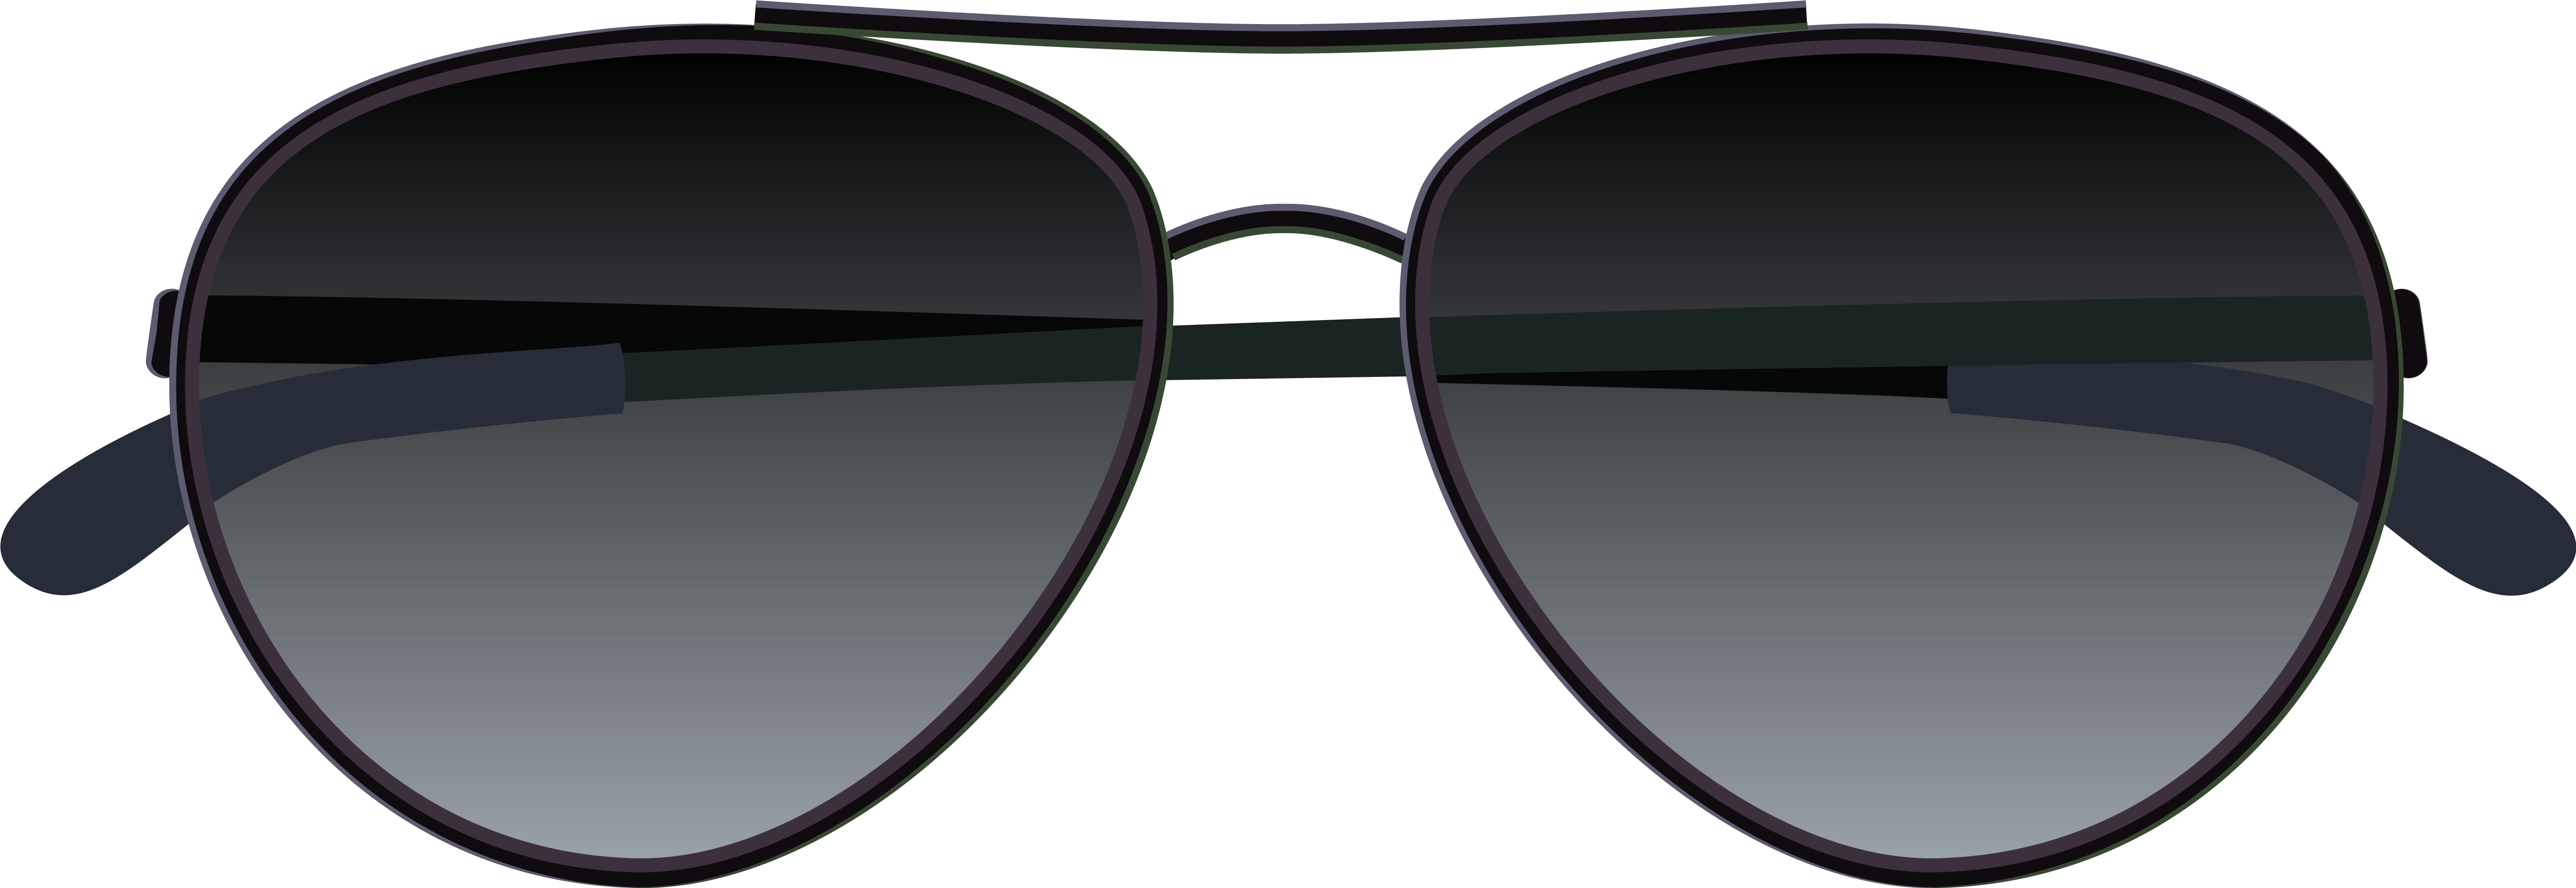 Sunglasses Clipart Free Clip Art 2 Clipartbold - Png Images With Transparent Background (6107x2183)